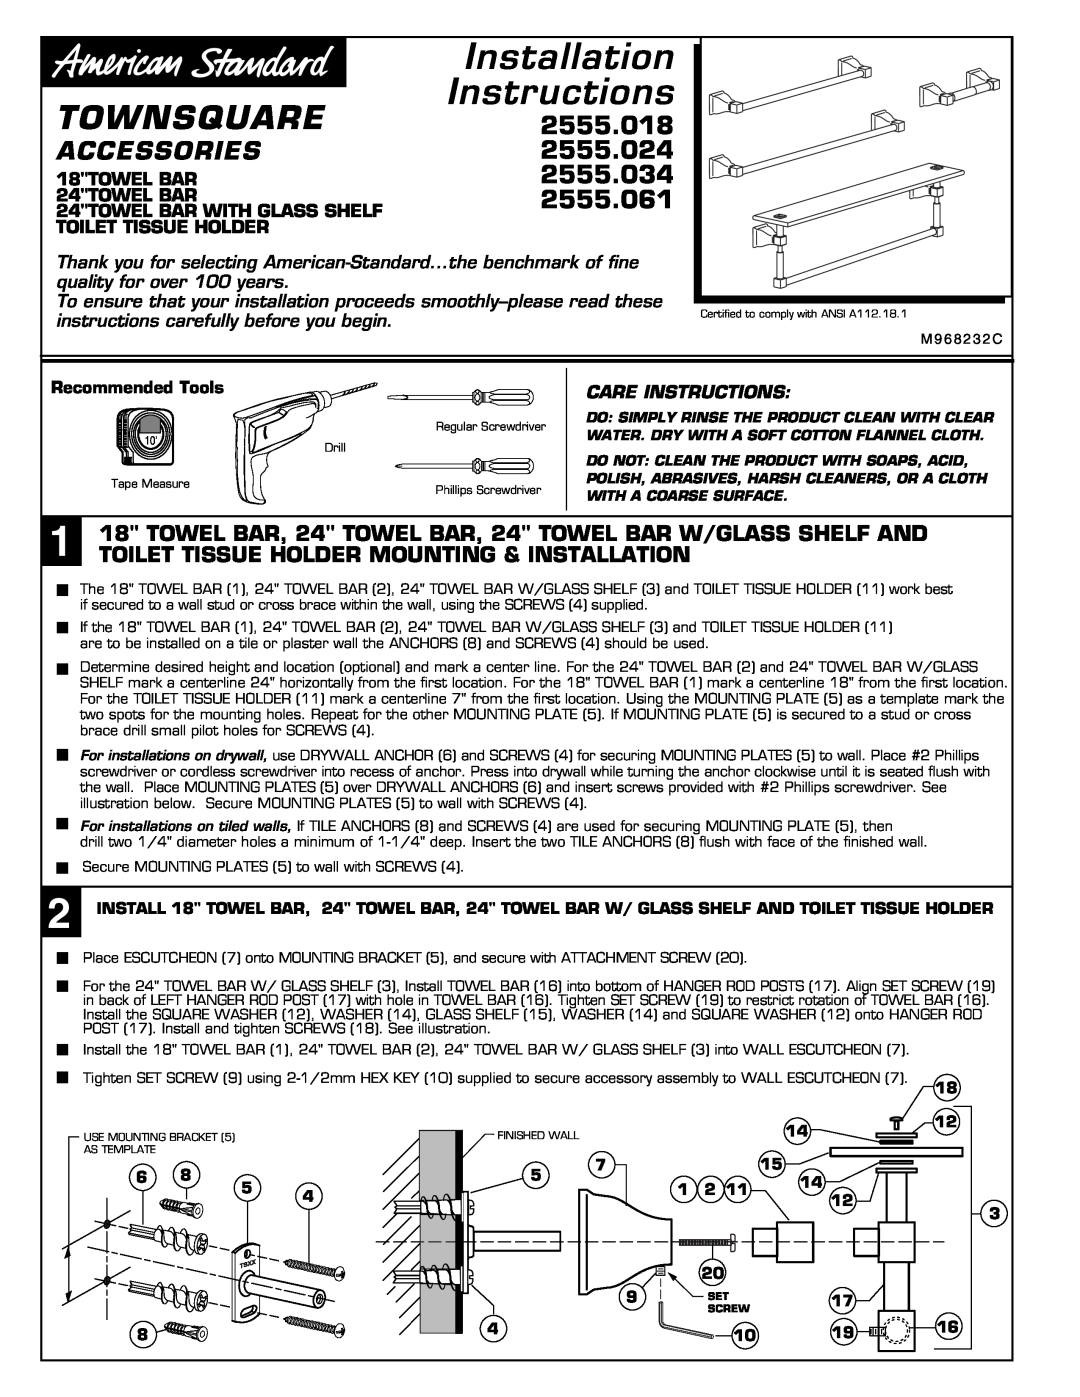 American Standard 2555.034, 2555.061 installation instructions Townsquare, Accessories, 2555.018, 18TOWEL BAR 24TOWEL BAR 